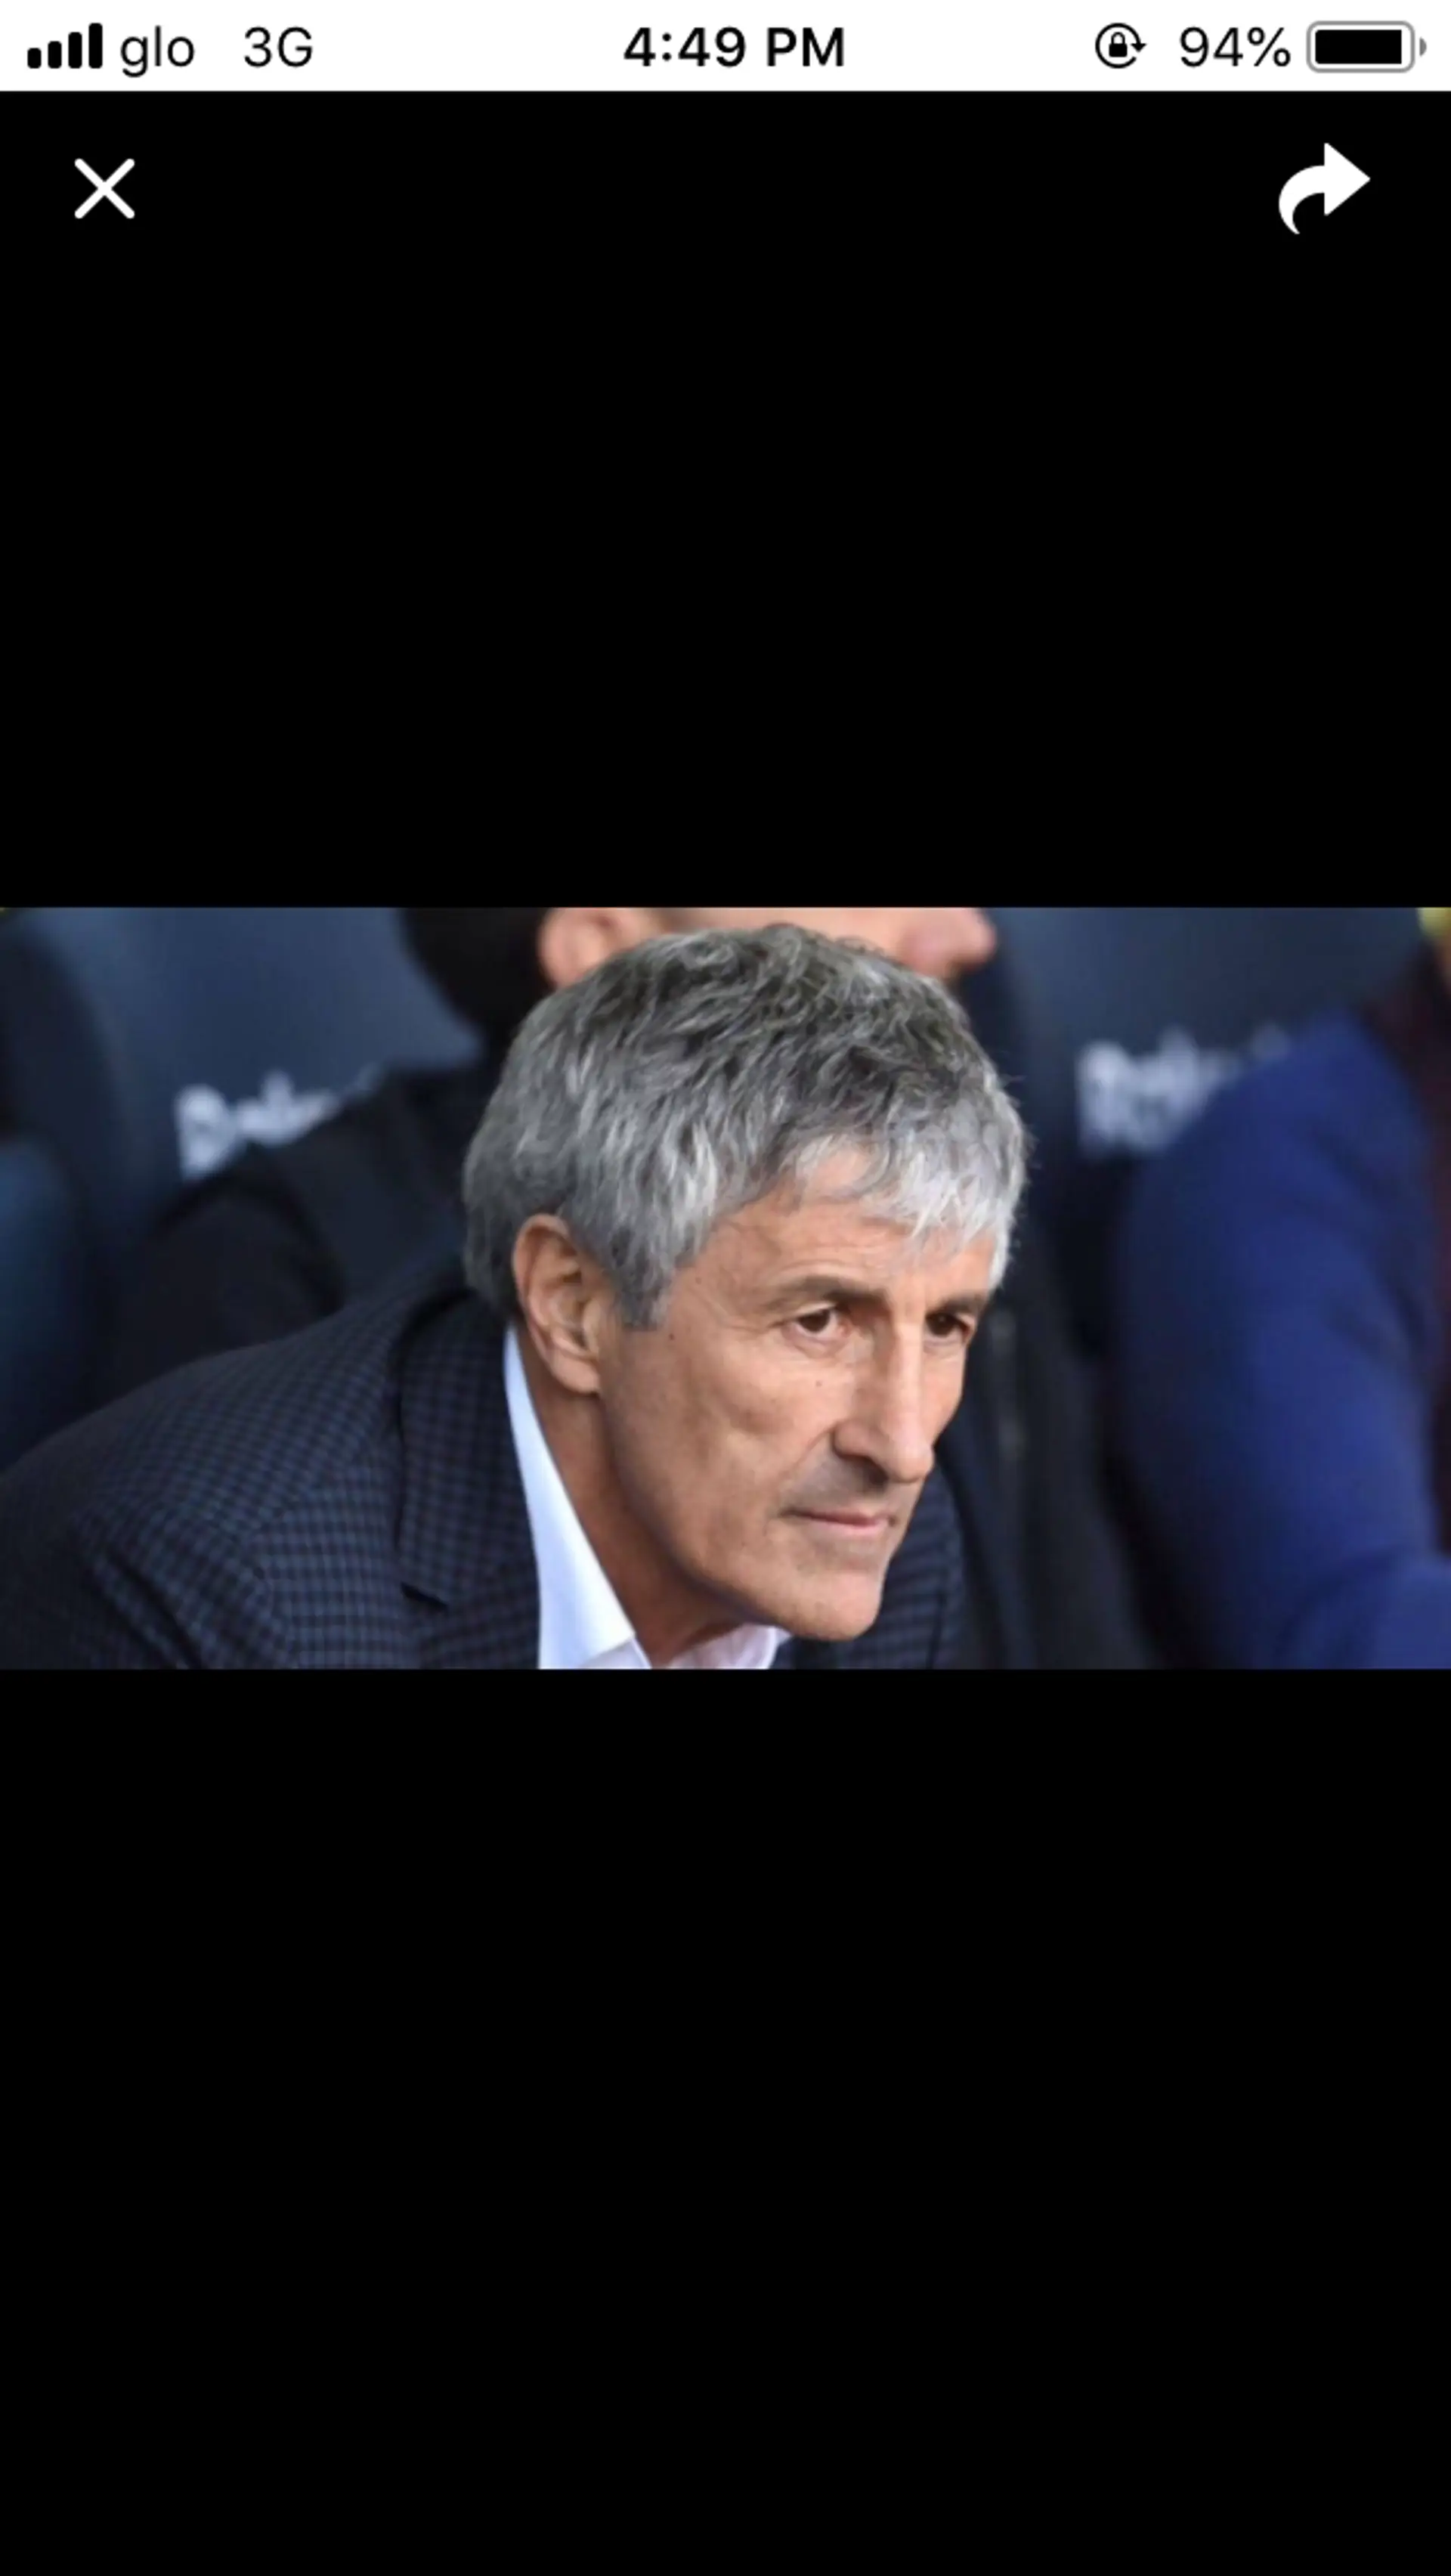 Who Is Going To Be The Right Replacement For Quique Setien If He Fails To Win UCL This Season?